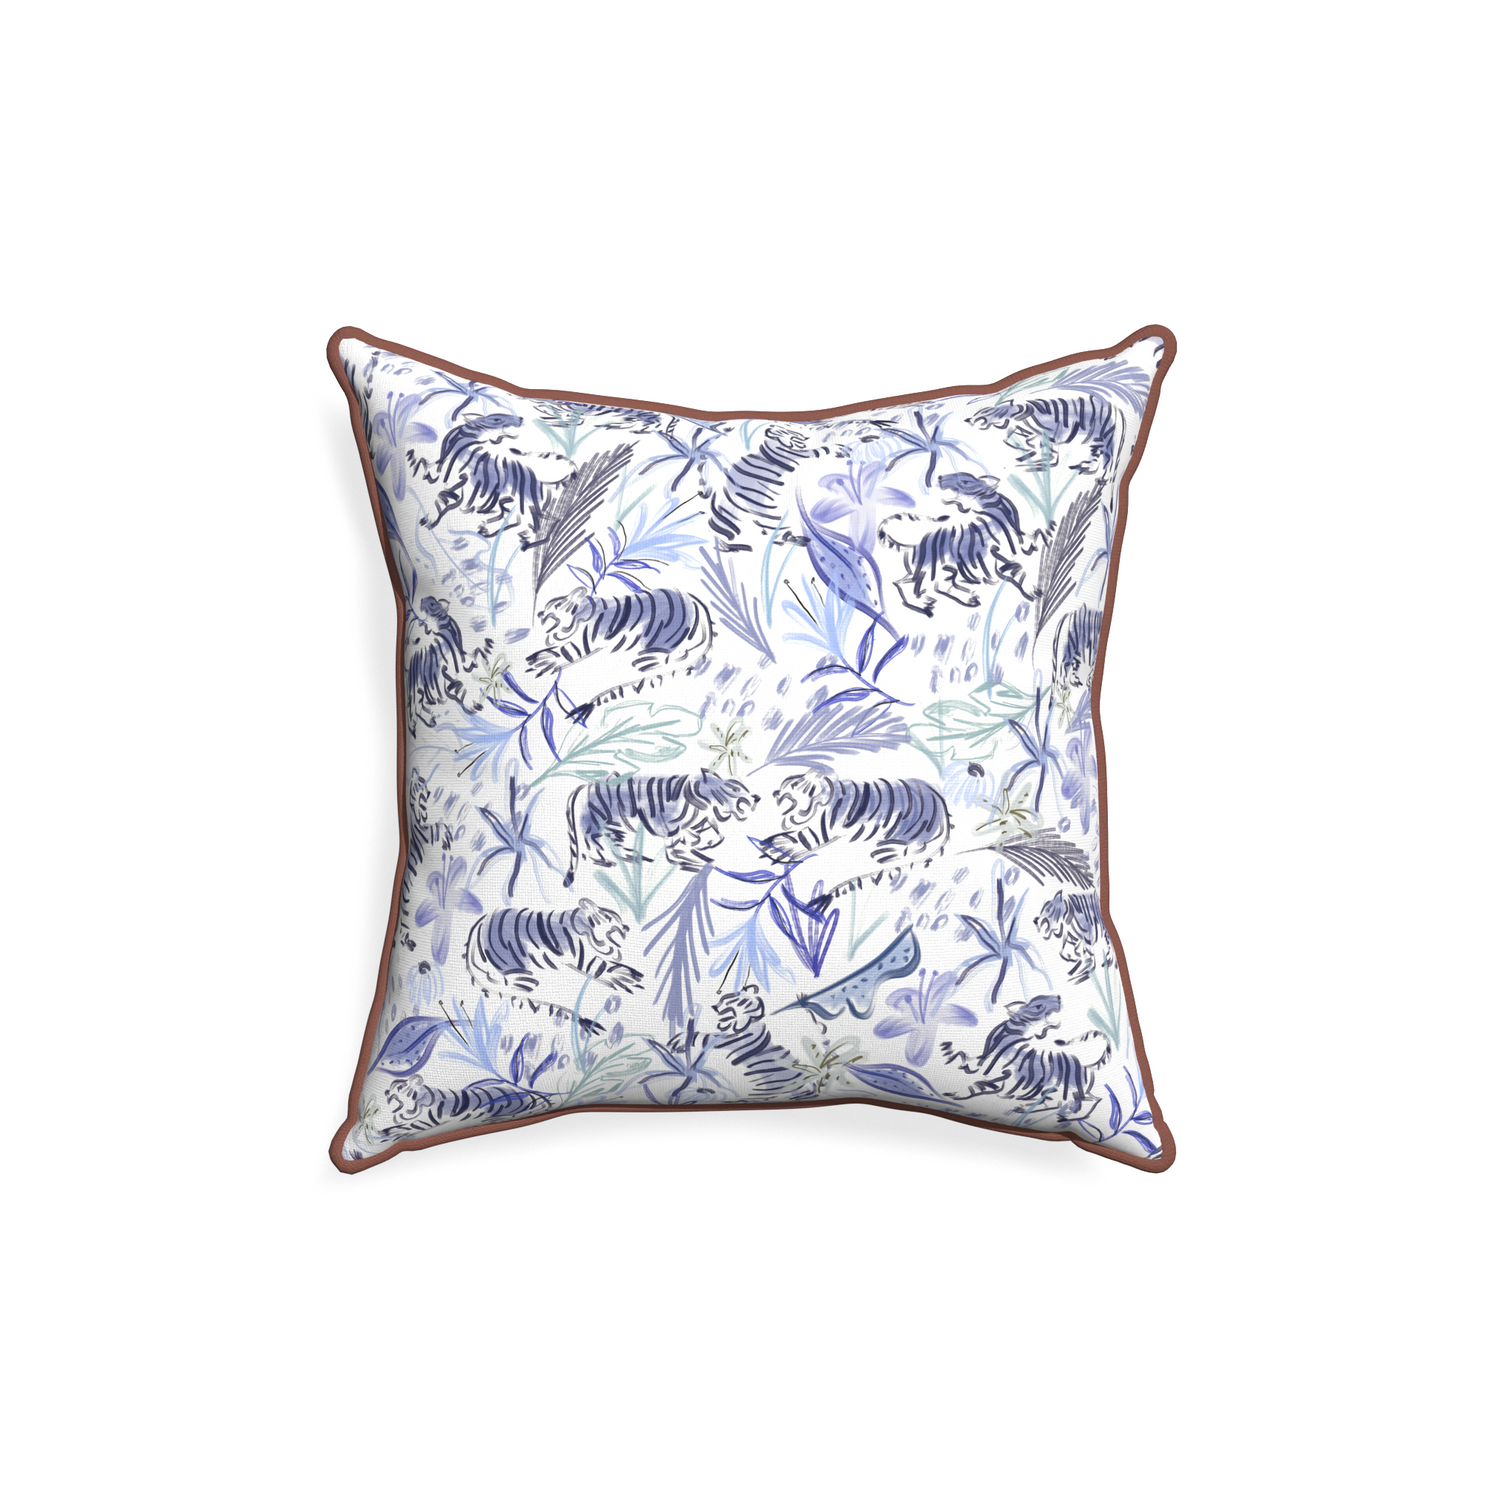 18-square frida blue custom blue with intricate tiger designpillow with w piping on white background